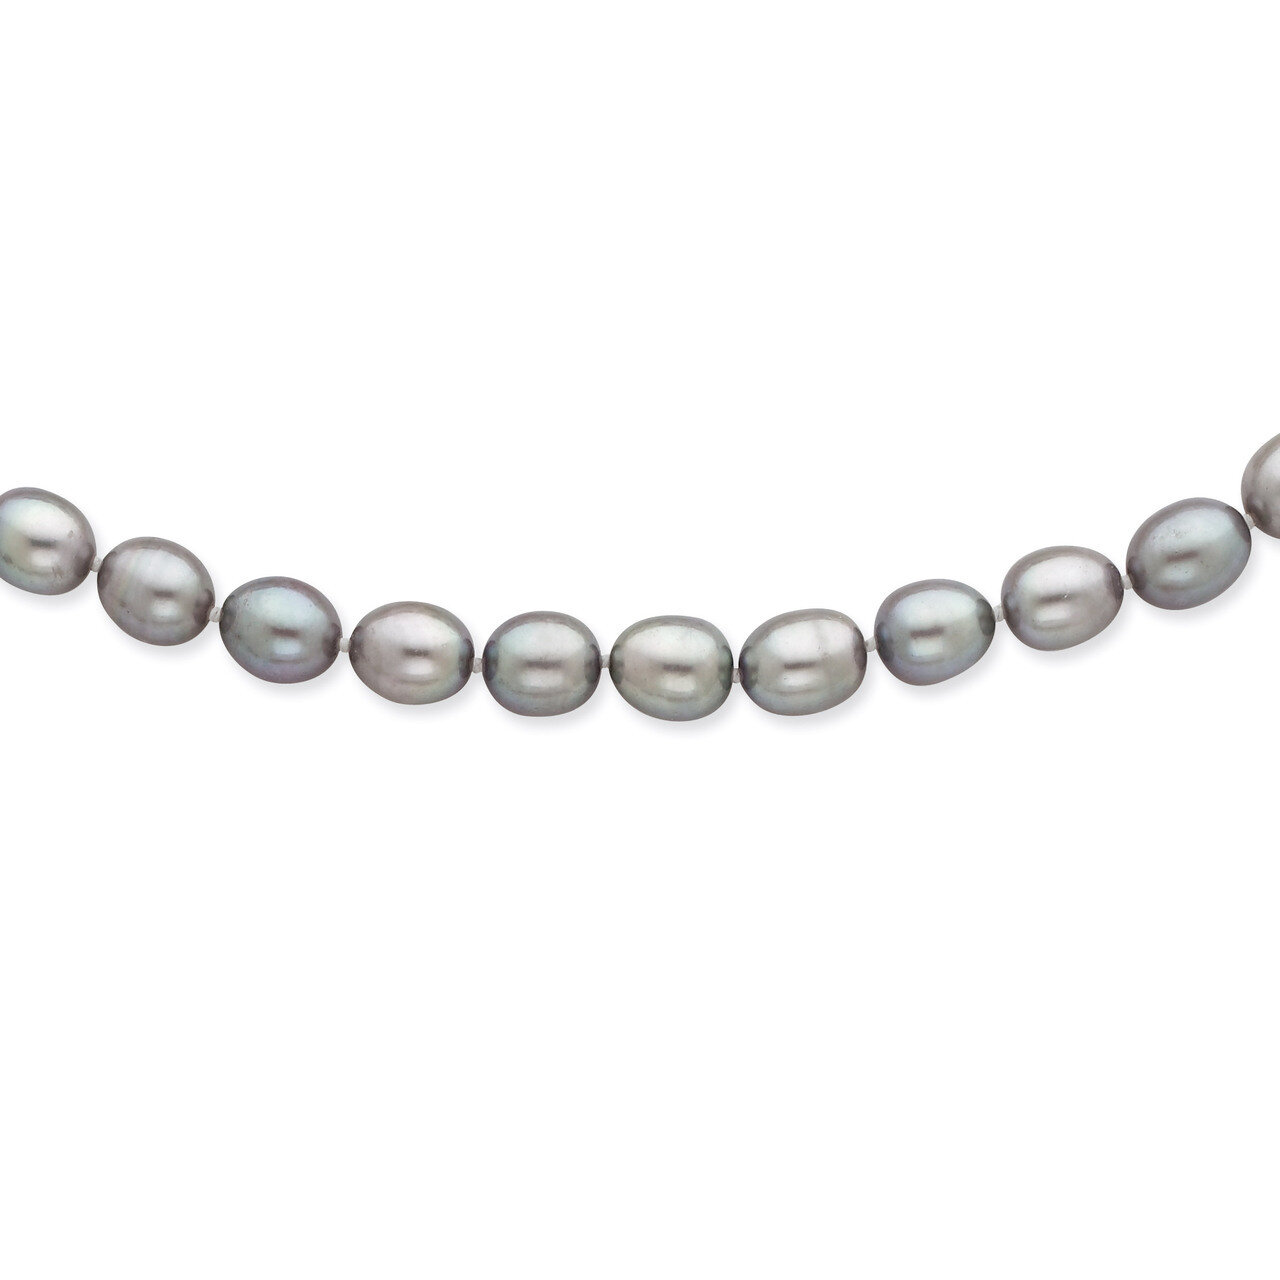 8-9mm Grey Cultured Pearl Necklace 14k White Gold XF415-16